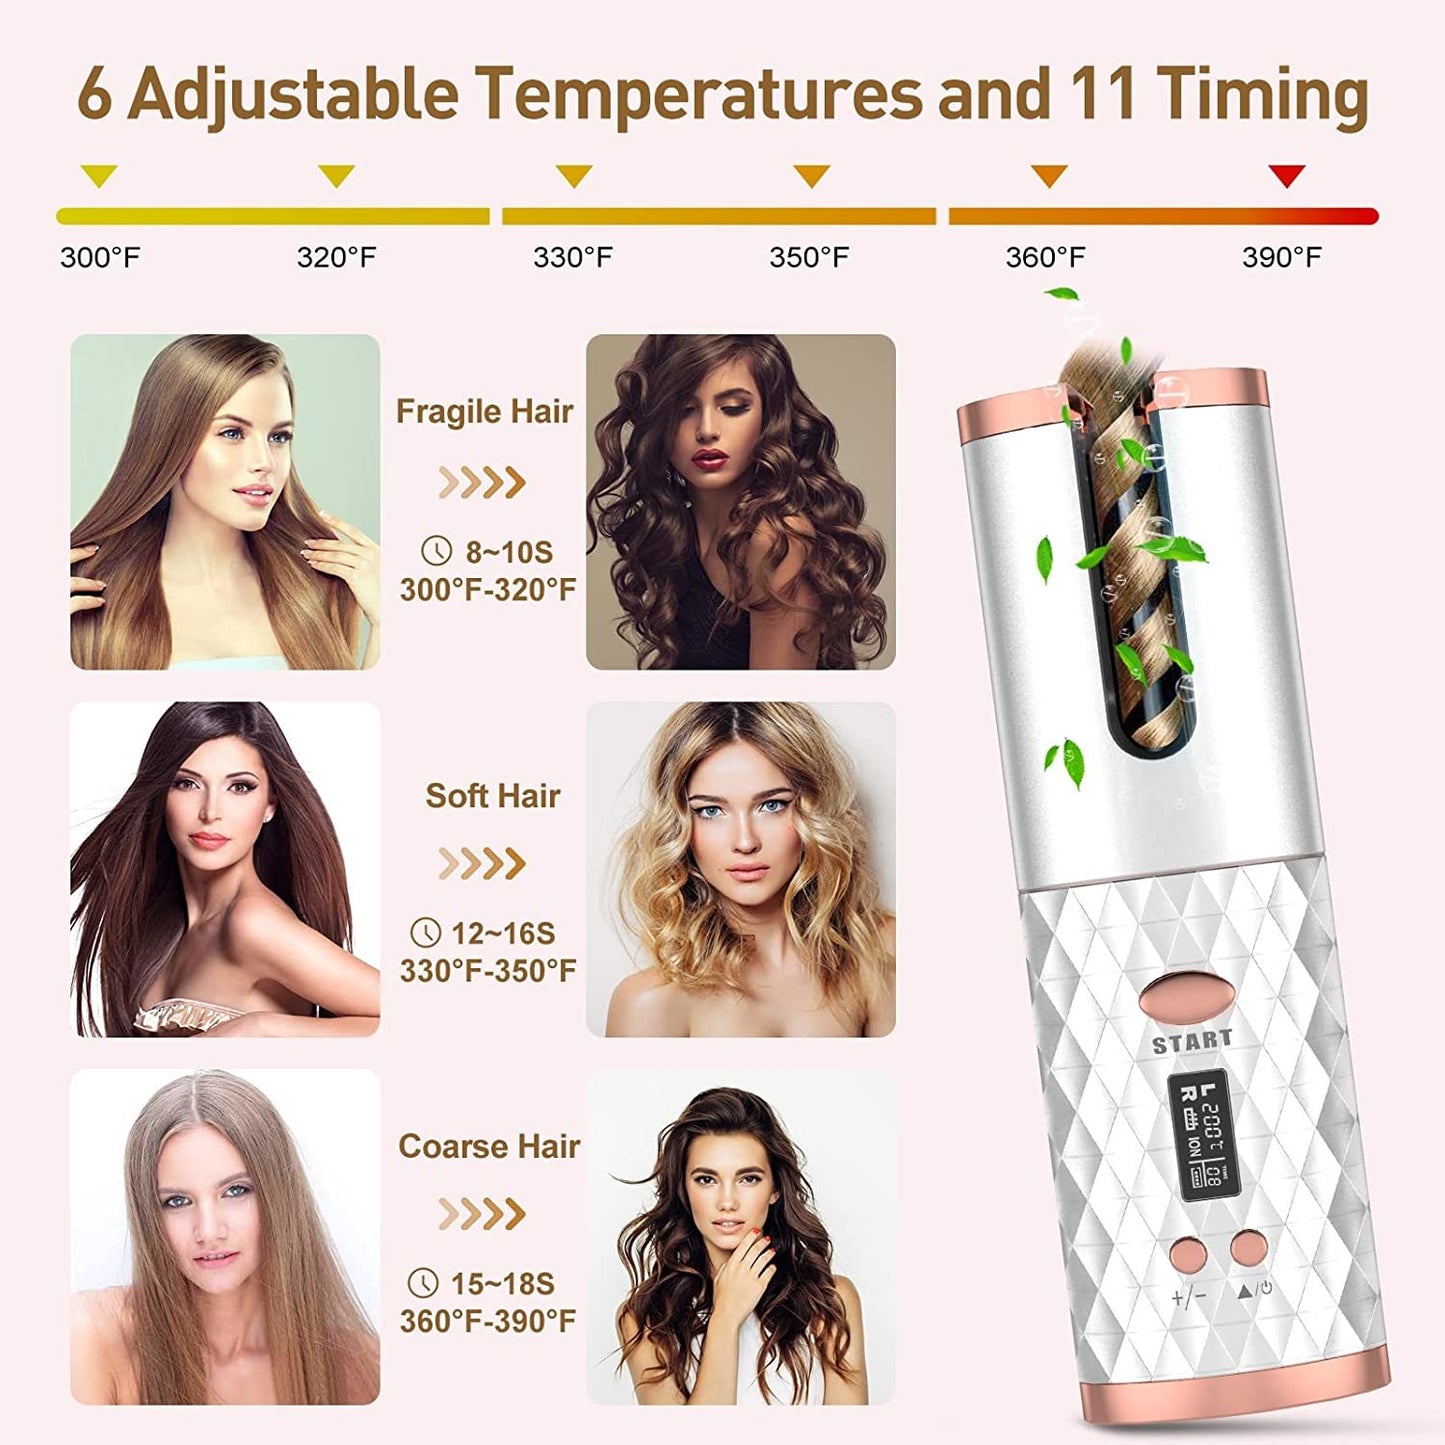 Wireless Automatic Curling Iron Rotating Ceramic Heating Hair Curler USB Rechargeable Portable Auto Hair Waver Corrugated Curling Wand Electric Curling Hair Tools